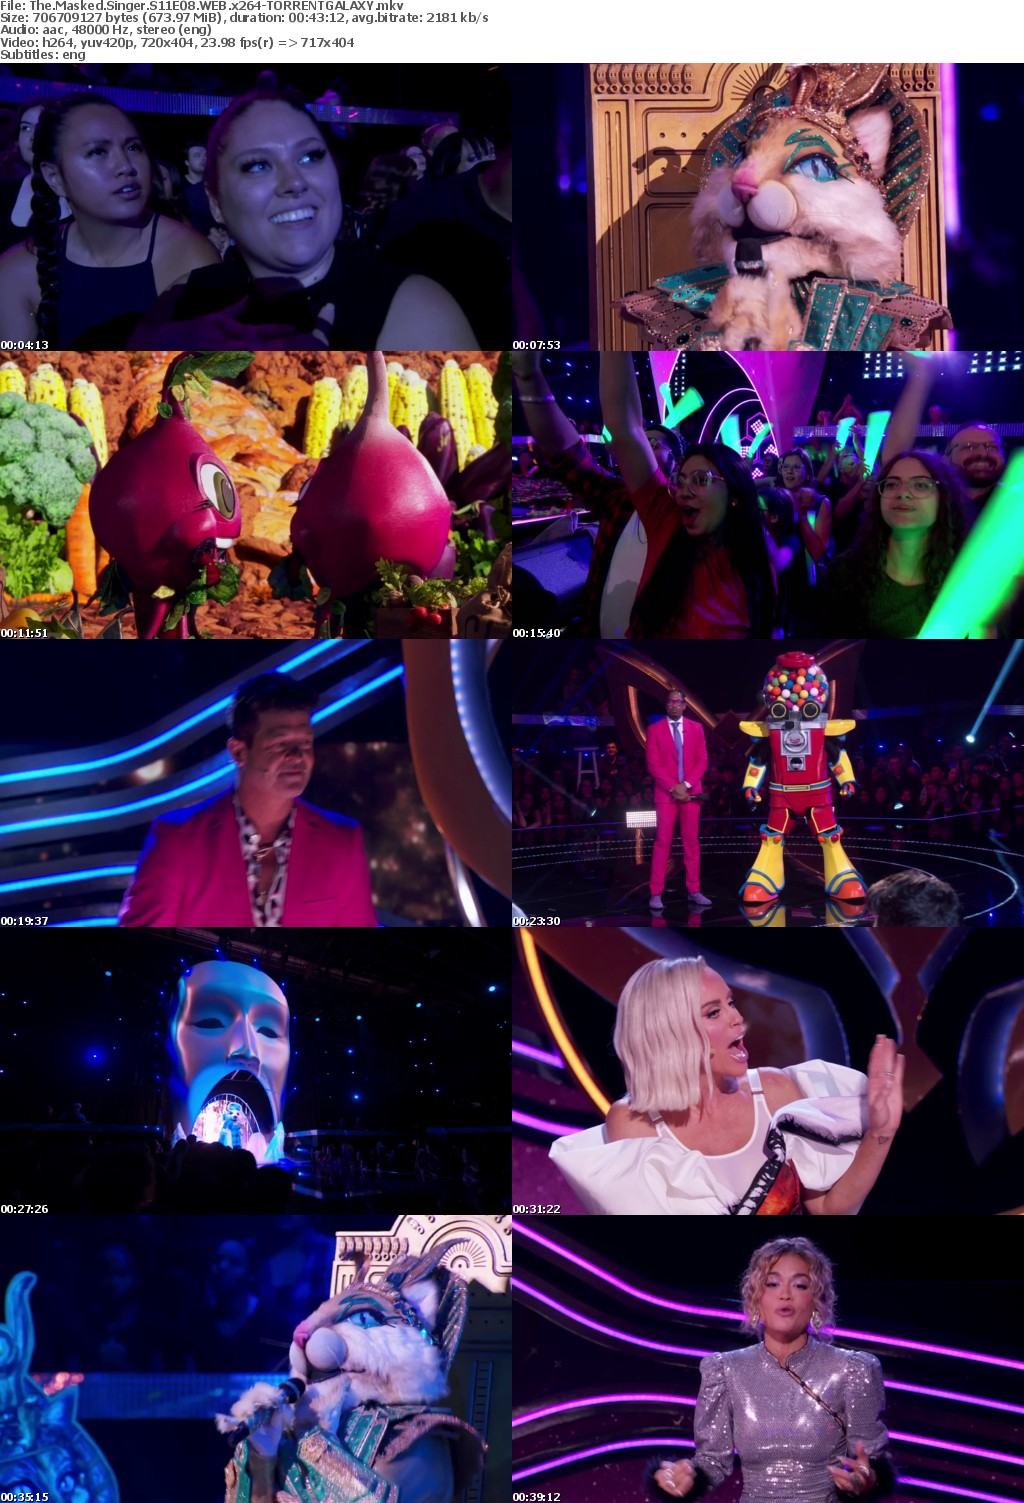 The Masked Singer S11E08 WEB x264-GALAXY